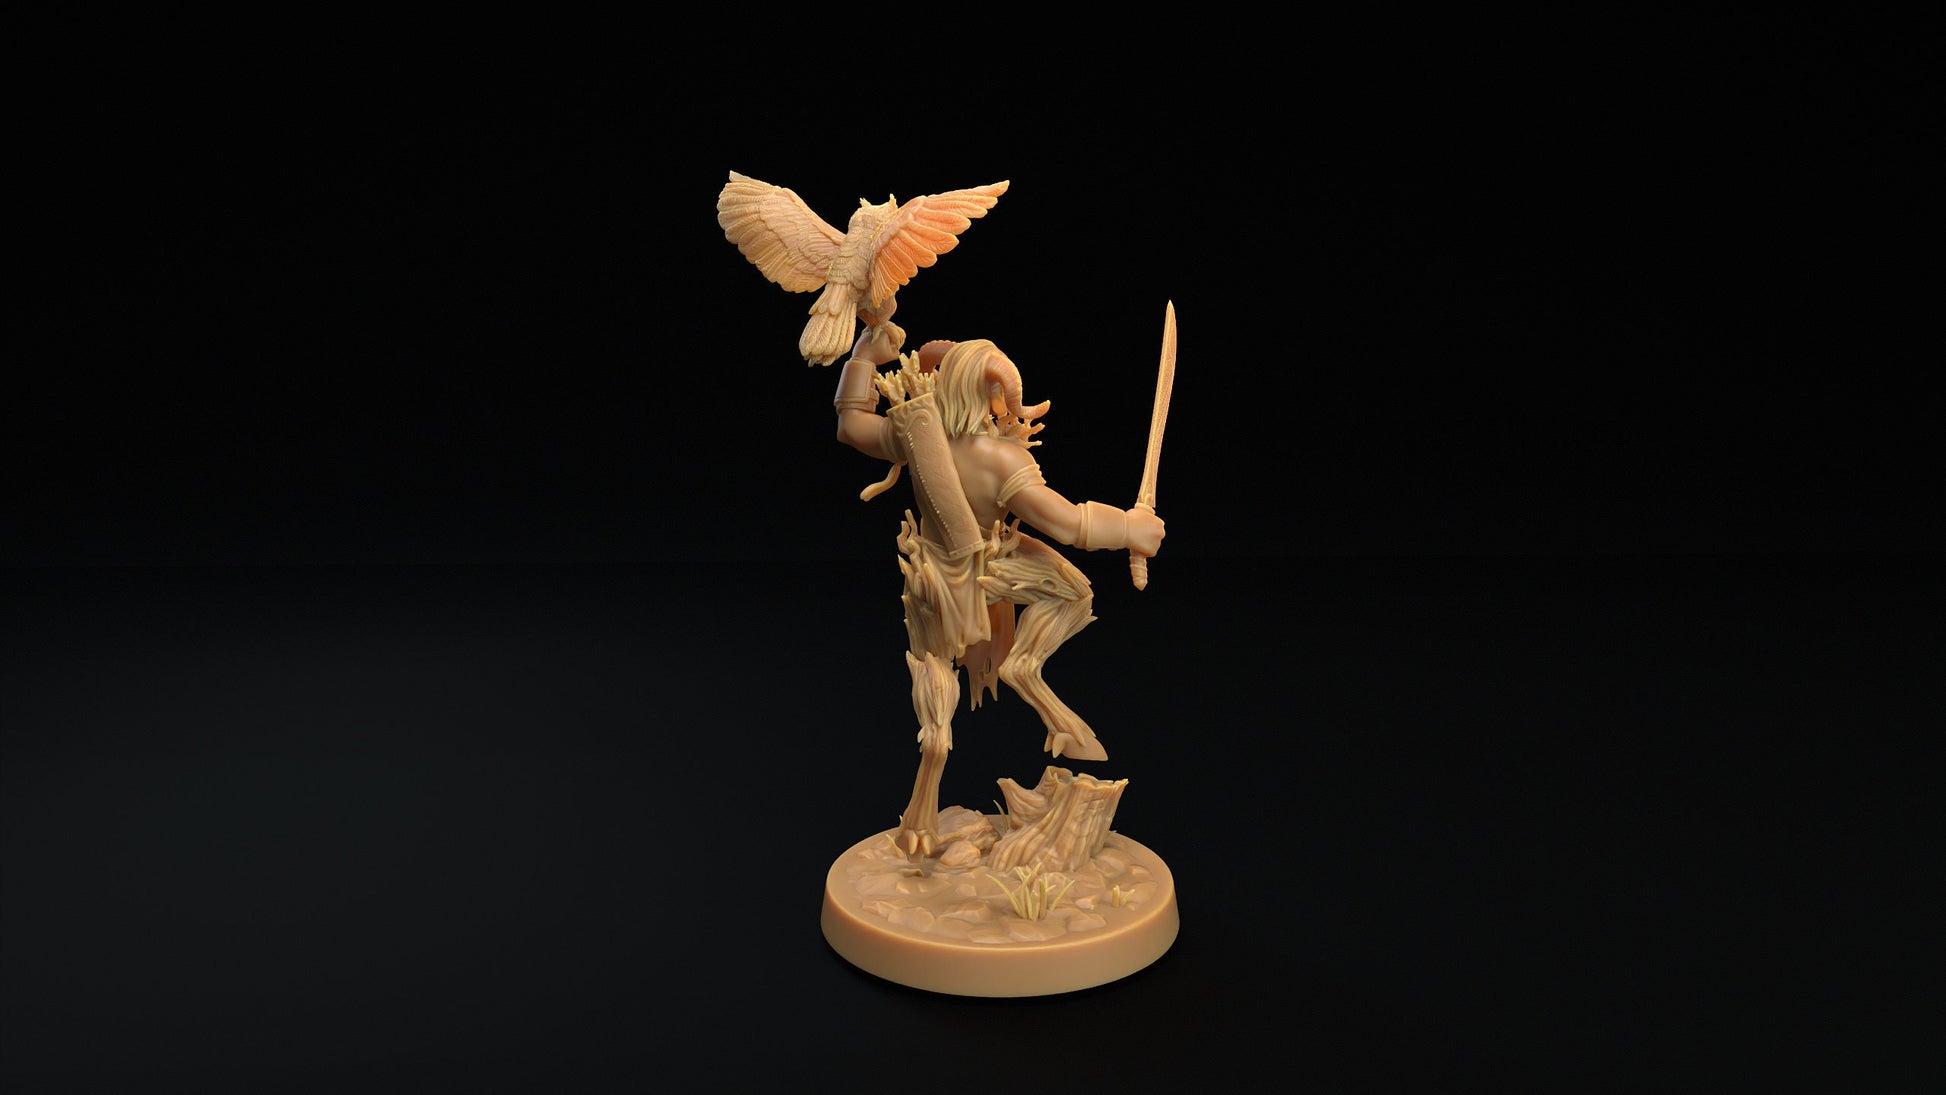 Dark Stalker | RPG Miniature for Dungeons and Dragons|Pathfinder|Tabletop Wargaming | Fey Miniature | Dragon Trappers Lodge